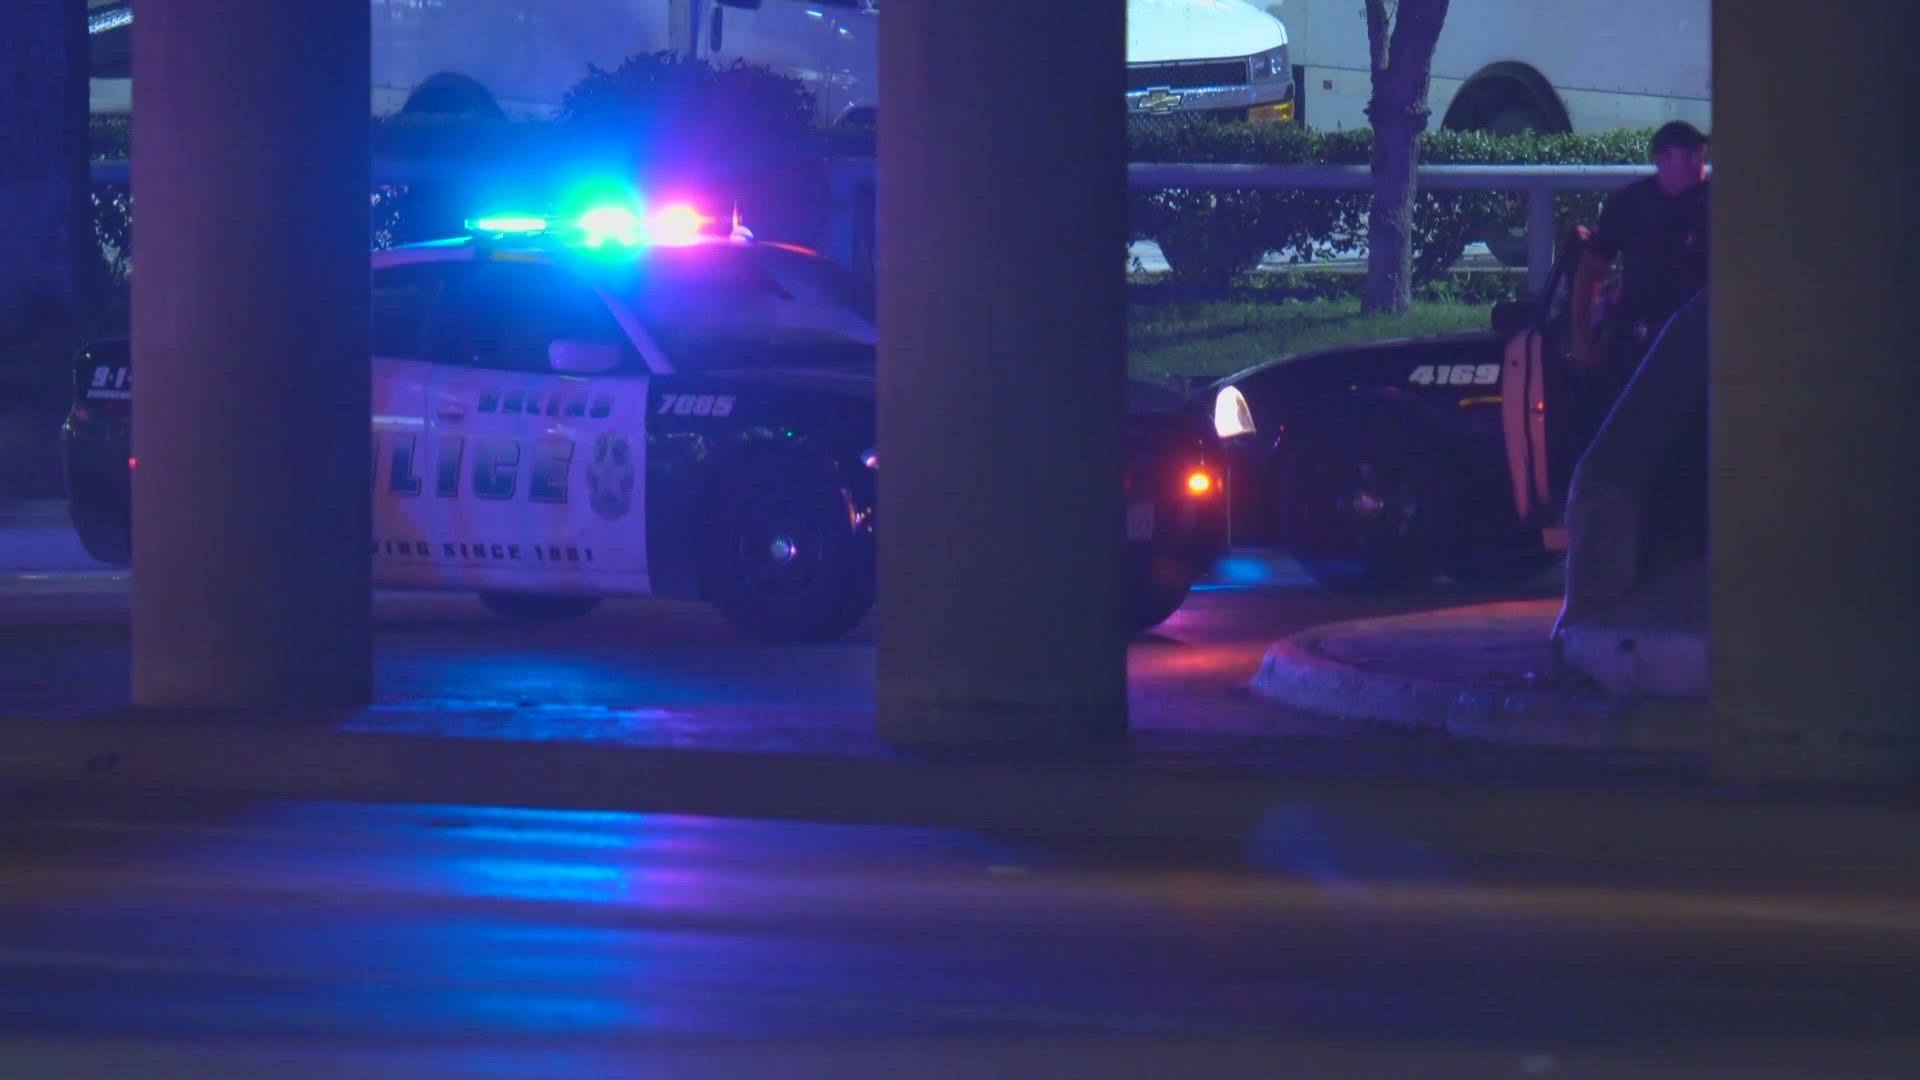 Police said both victims were found shot Saturday night on North Stemmons Freeway.